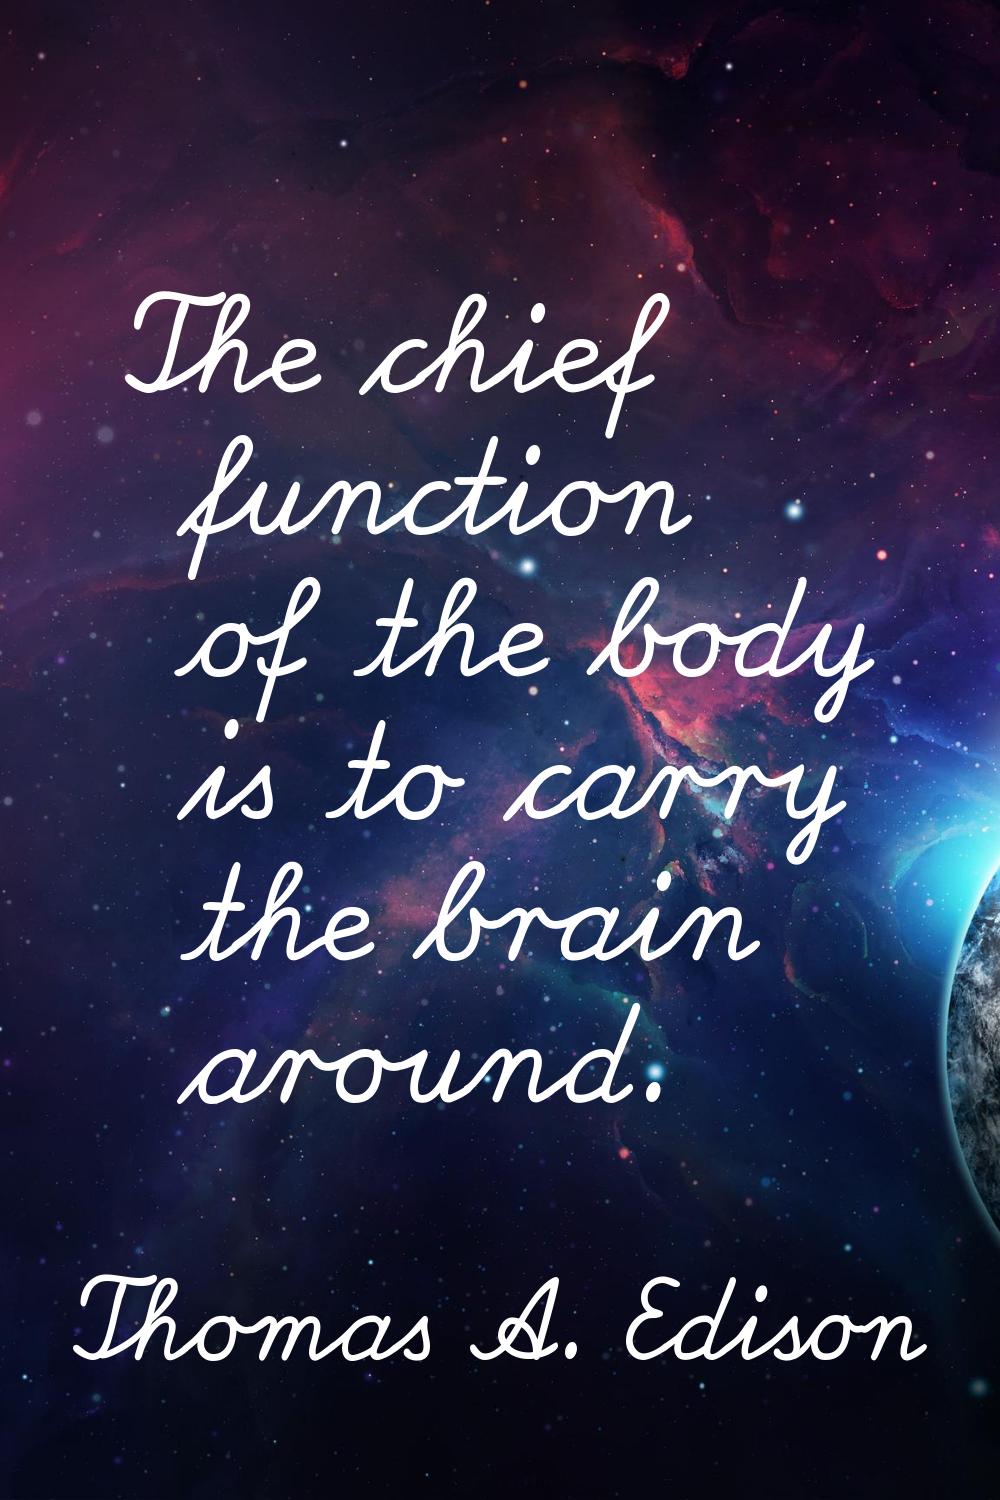 The chief function of the body is to carry the brain around.